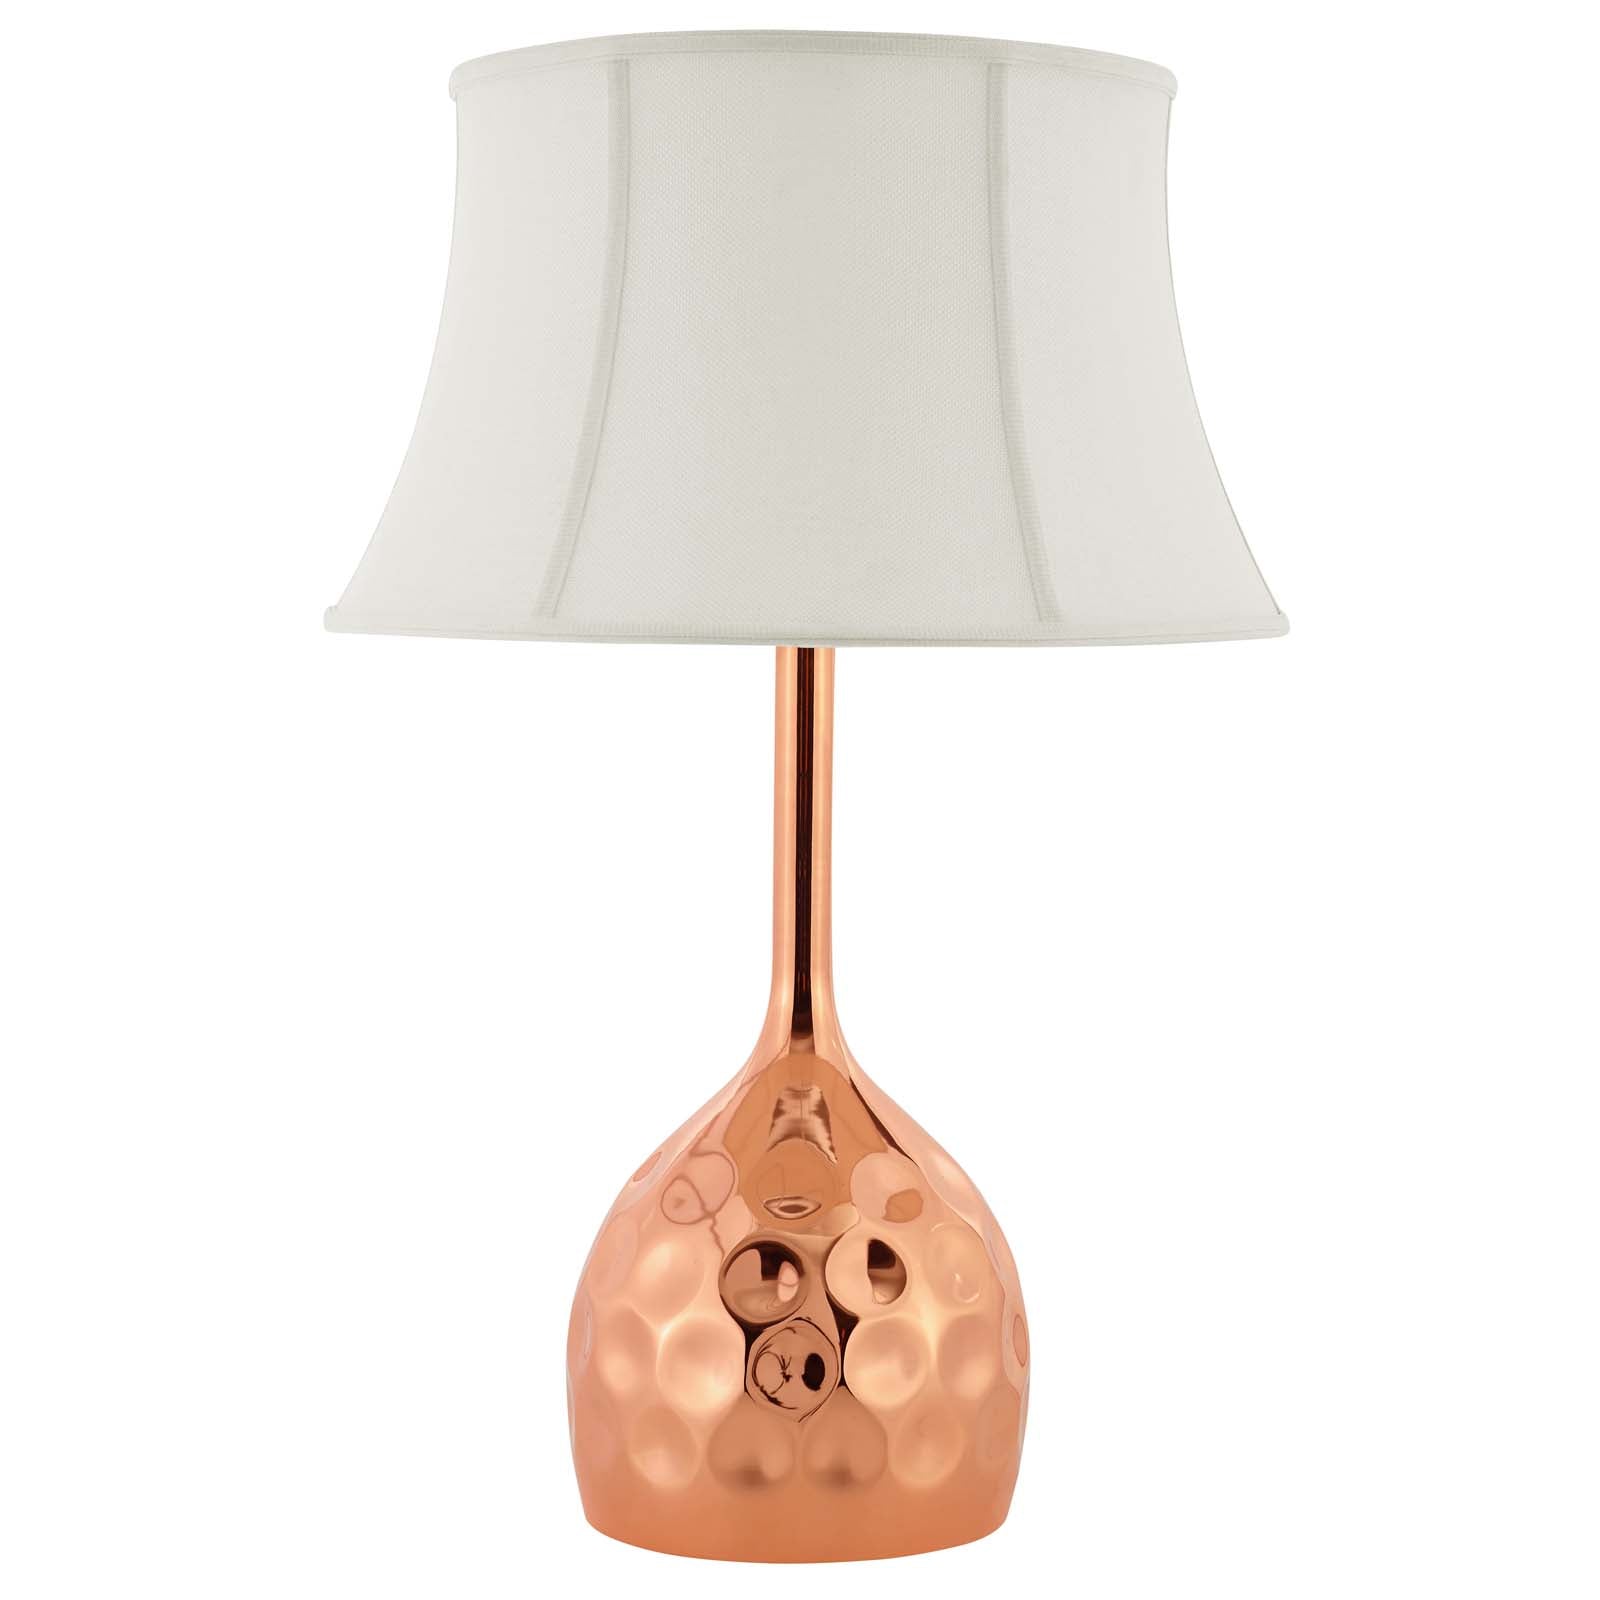 Modway Table Lamps - Dimple Table Lamp Rose Gold